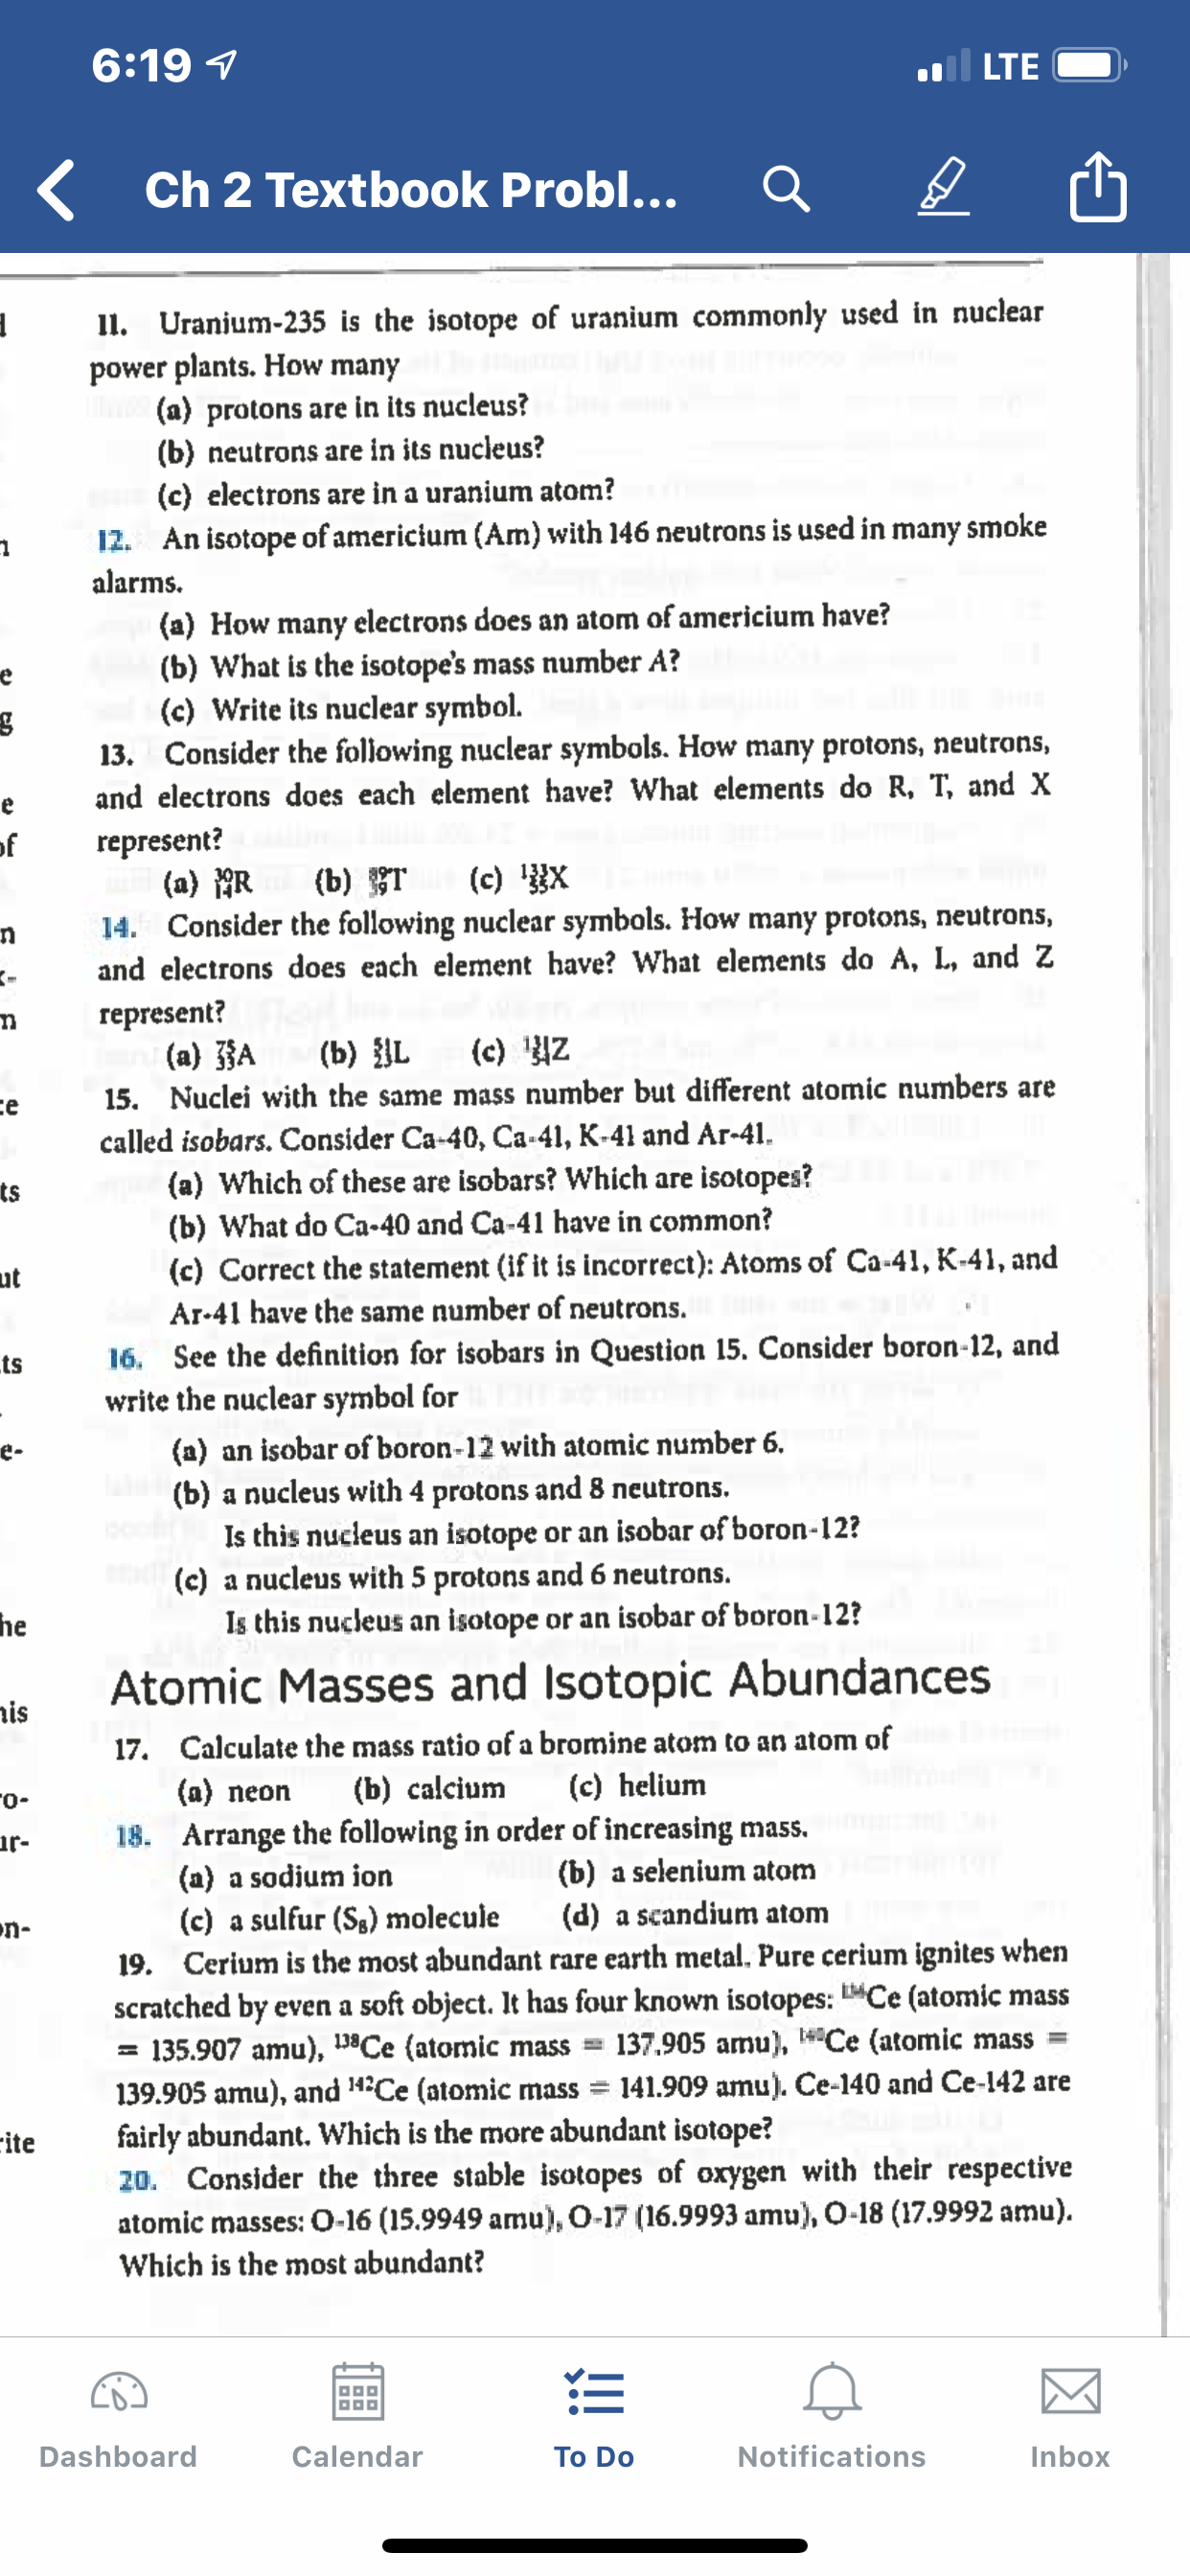 6:19 1
LTE
Ch 2 Textbook Probl...
I1. Uranjum-235 is the isotope of uranium commonly used in nuclear
power plants. How many
(a) protons are in its nucleus?
(b) neutrons are in its nucleus?
(c) electrons are in a uranium atom?
12. An isotope of americium (Am) with 146 neutrons is used in many smoke
alarms.
(a) How many electrons does an atom of americium have?
(b) What is the isotope's mass number A?
(c) Write its nuclear symbol.
13. Consider the following nuclear symbols. How many protons, neutrons,
and electrons does each element have? What elements do R, T, and X
represent?
(a) AR
14. Consider the following nuclear symbols. How many protons, neutrons,
of
(c) X
(b) T
and electrons does each element have? What elements do A, L, and Z
represent?
(a) JA
15. Nuclei with the same mass number but different atomic numbers are
called isobars. Consider Ca-40, Ca-41, K-41 and Ar-41.
(a) Which of these are isobars? Which are isotopes?
(c) Z
(b) {L
ce
ts
(b) What do Ca-40 and Ca-41 have in common?
(c) Correct the statement (if it is incorrect): Atoms of Ca-41, K-41, and
ut
Ar-41 have the same number of neutrons.
16. See the definition for isobars in Question 15. Consider boron-12, and
write the nuclear symbol for
(a) an isobar of boron-12 with atomic number 6.
(b) a nucleus with 4 protons and 8 neutrons.
Is this nucleus an isotope or an isobar of boron-12?
(c) a nucleus with 5 protons and 6 neutrons.
Is this nucleus an isotope or an isobar of boron-12?
ts
e-
he
Atomic Masses and Isotopic Abundances
is
17. Calculate the mass ratio of a bromine atom to an atom of
(b) calcium
(c) helium
(a) neon
-o-
18. Arrange the following in order of increasing mass.
(a) a sodium ion
(c) a sulfur (Sg) molecule
19. Cerium is the most abundant rare earth metal. Pure cerium ignites when
scratched by even a soft object. It has four known isotopes: "Ce (atomic mass
= 135.907 amu), 198Ce (atomic mass
139.905 amu), and 14Ce (atomic mass =
fairly abundant. Which is the more abundant isotope?
20. Consider the three stable isotopes of oxygen with their respective
ur-
(b) a selenium atom
(d) a scandium atom
n-
137.905 amu), Ce (atomic mass =
141.909 amu). Ce-140 and Ce-142 are
cite
atomic masses: O-16 (15.9949 amu), O-17 (16.9993 amu), O-18 (17.9992 amu).
Which is the most abundant?
Notifications
Inbox
Dashboard
Calendar
To Do
